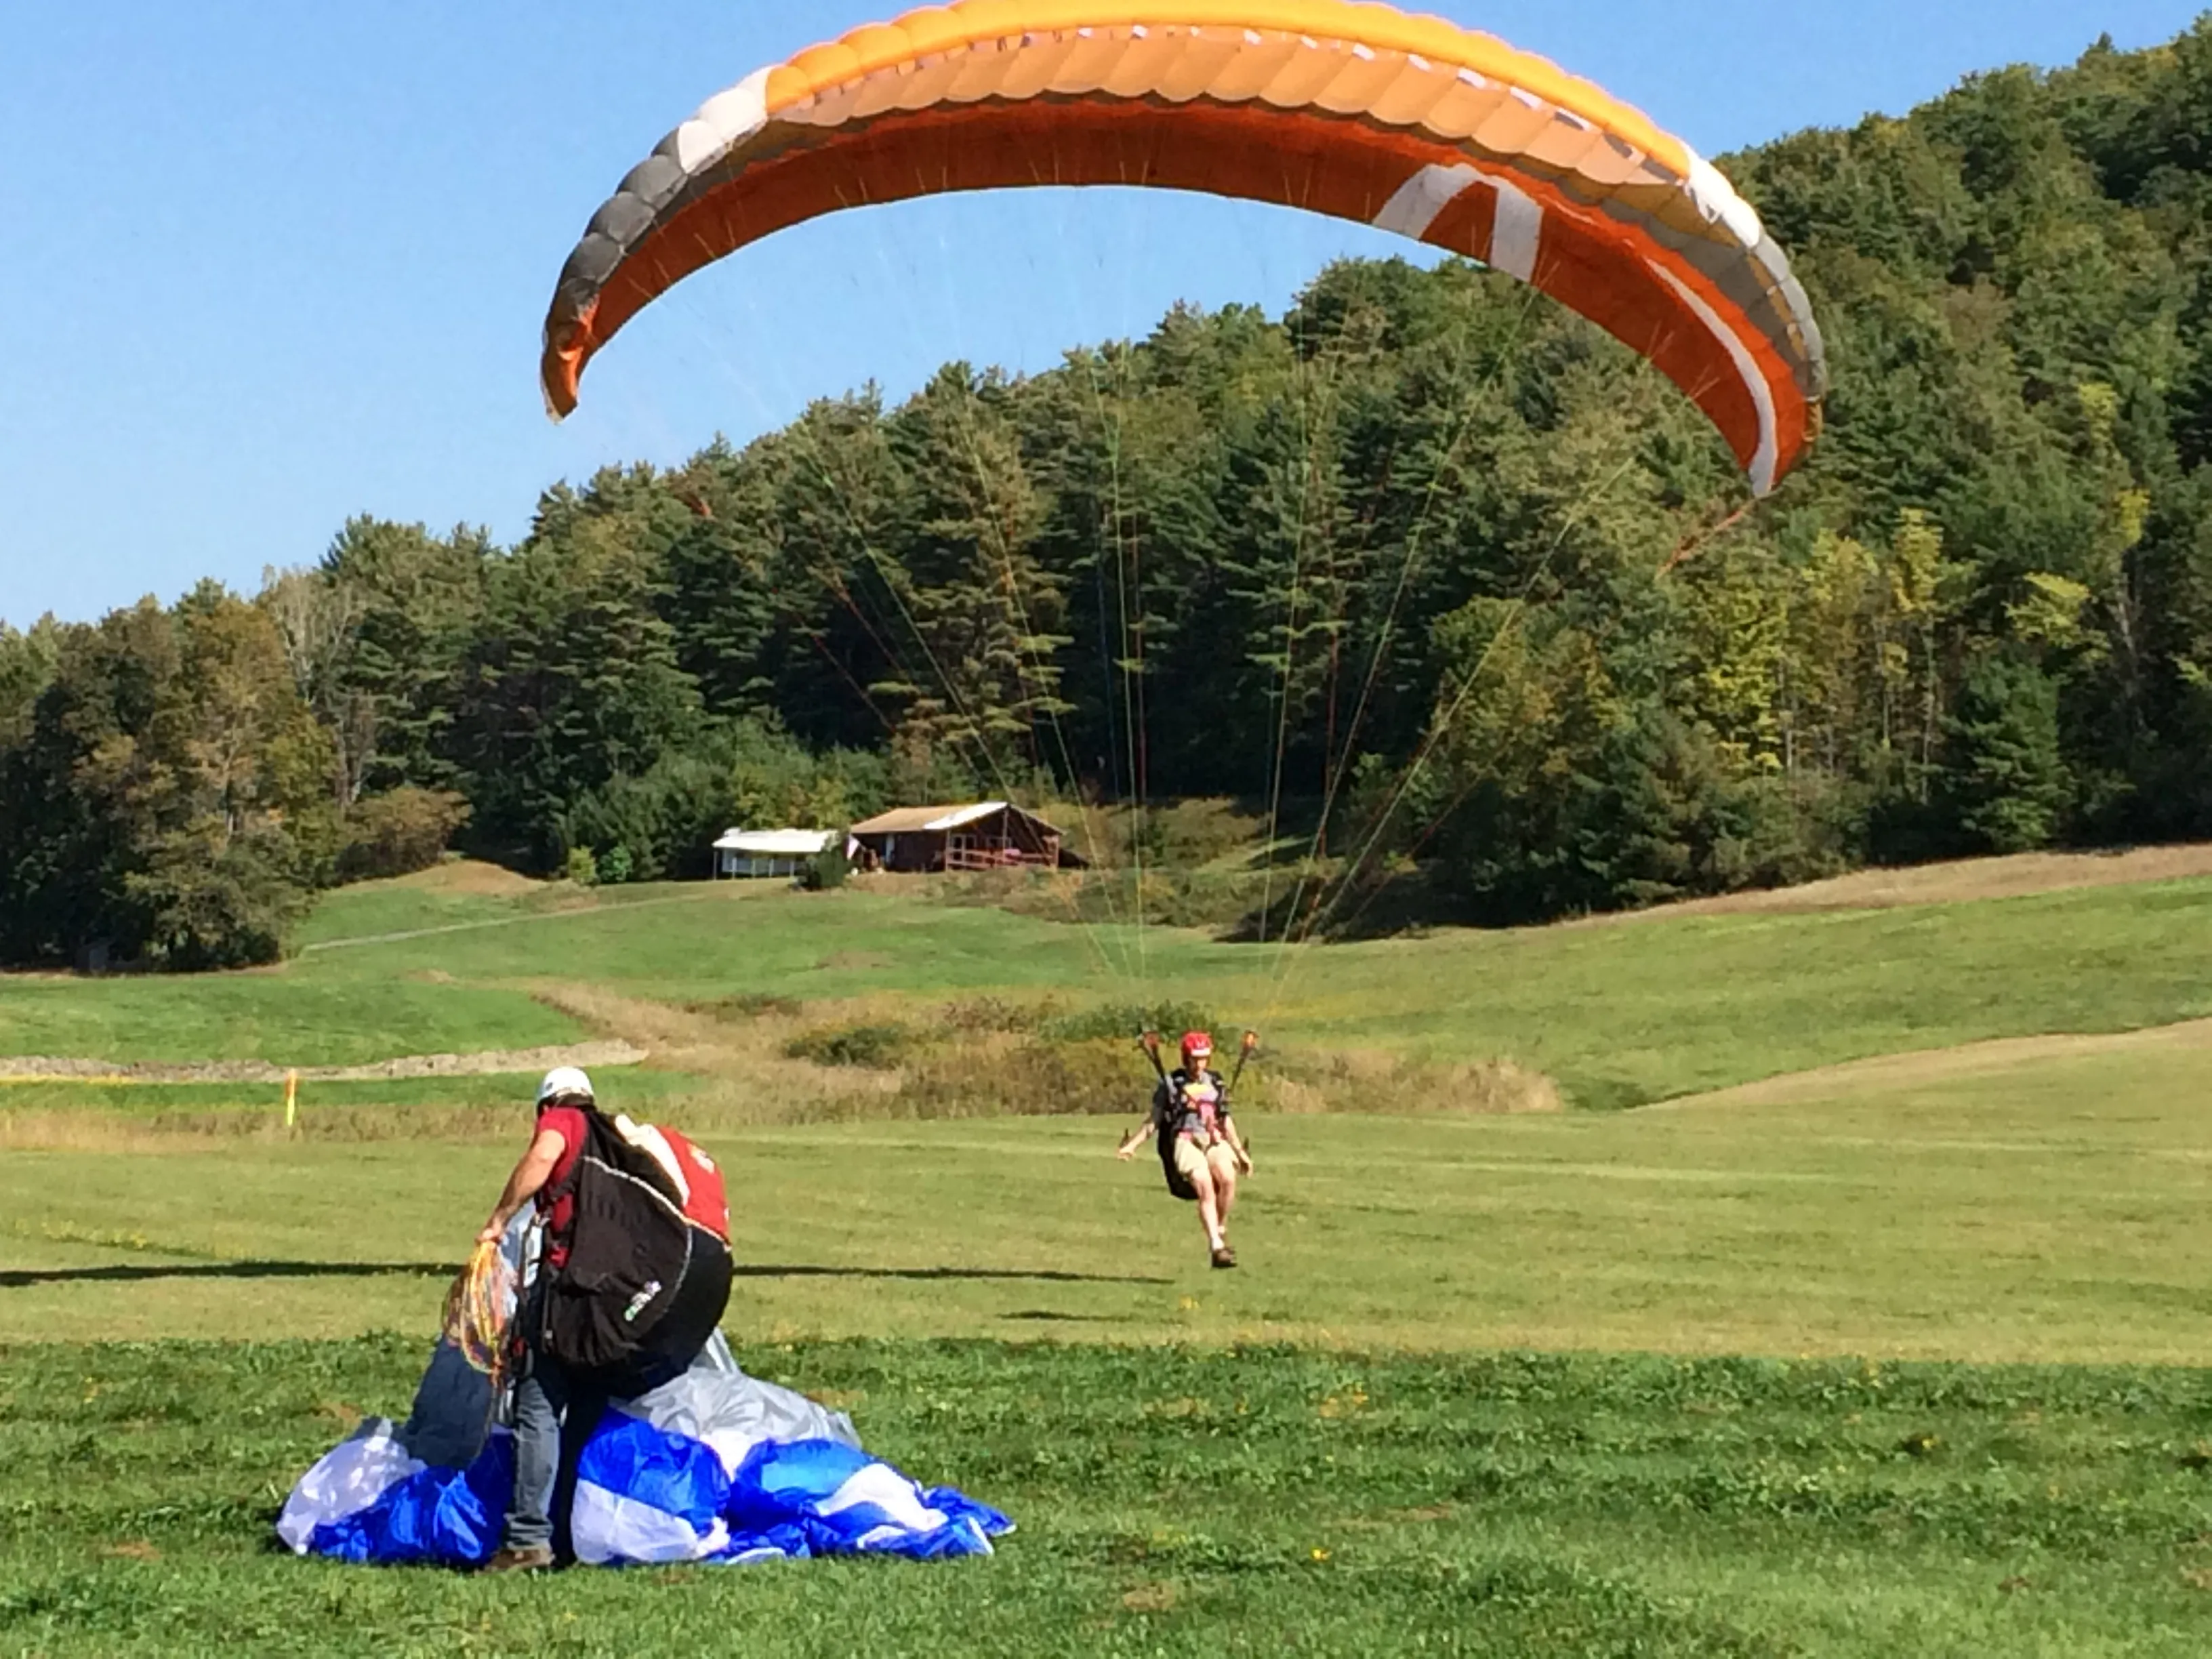 Flight Paragliding and Hang Gliding School in Italy, Europe | Paragliding - Rated 1.4